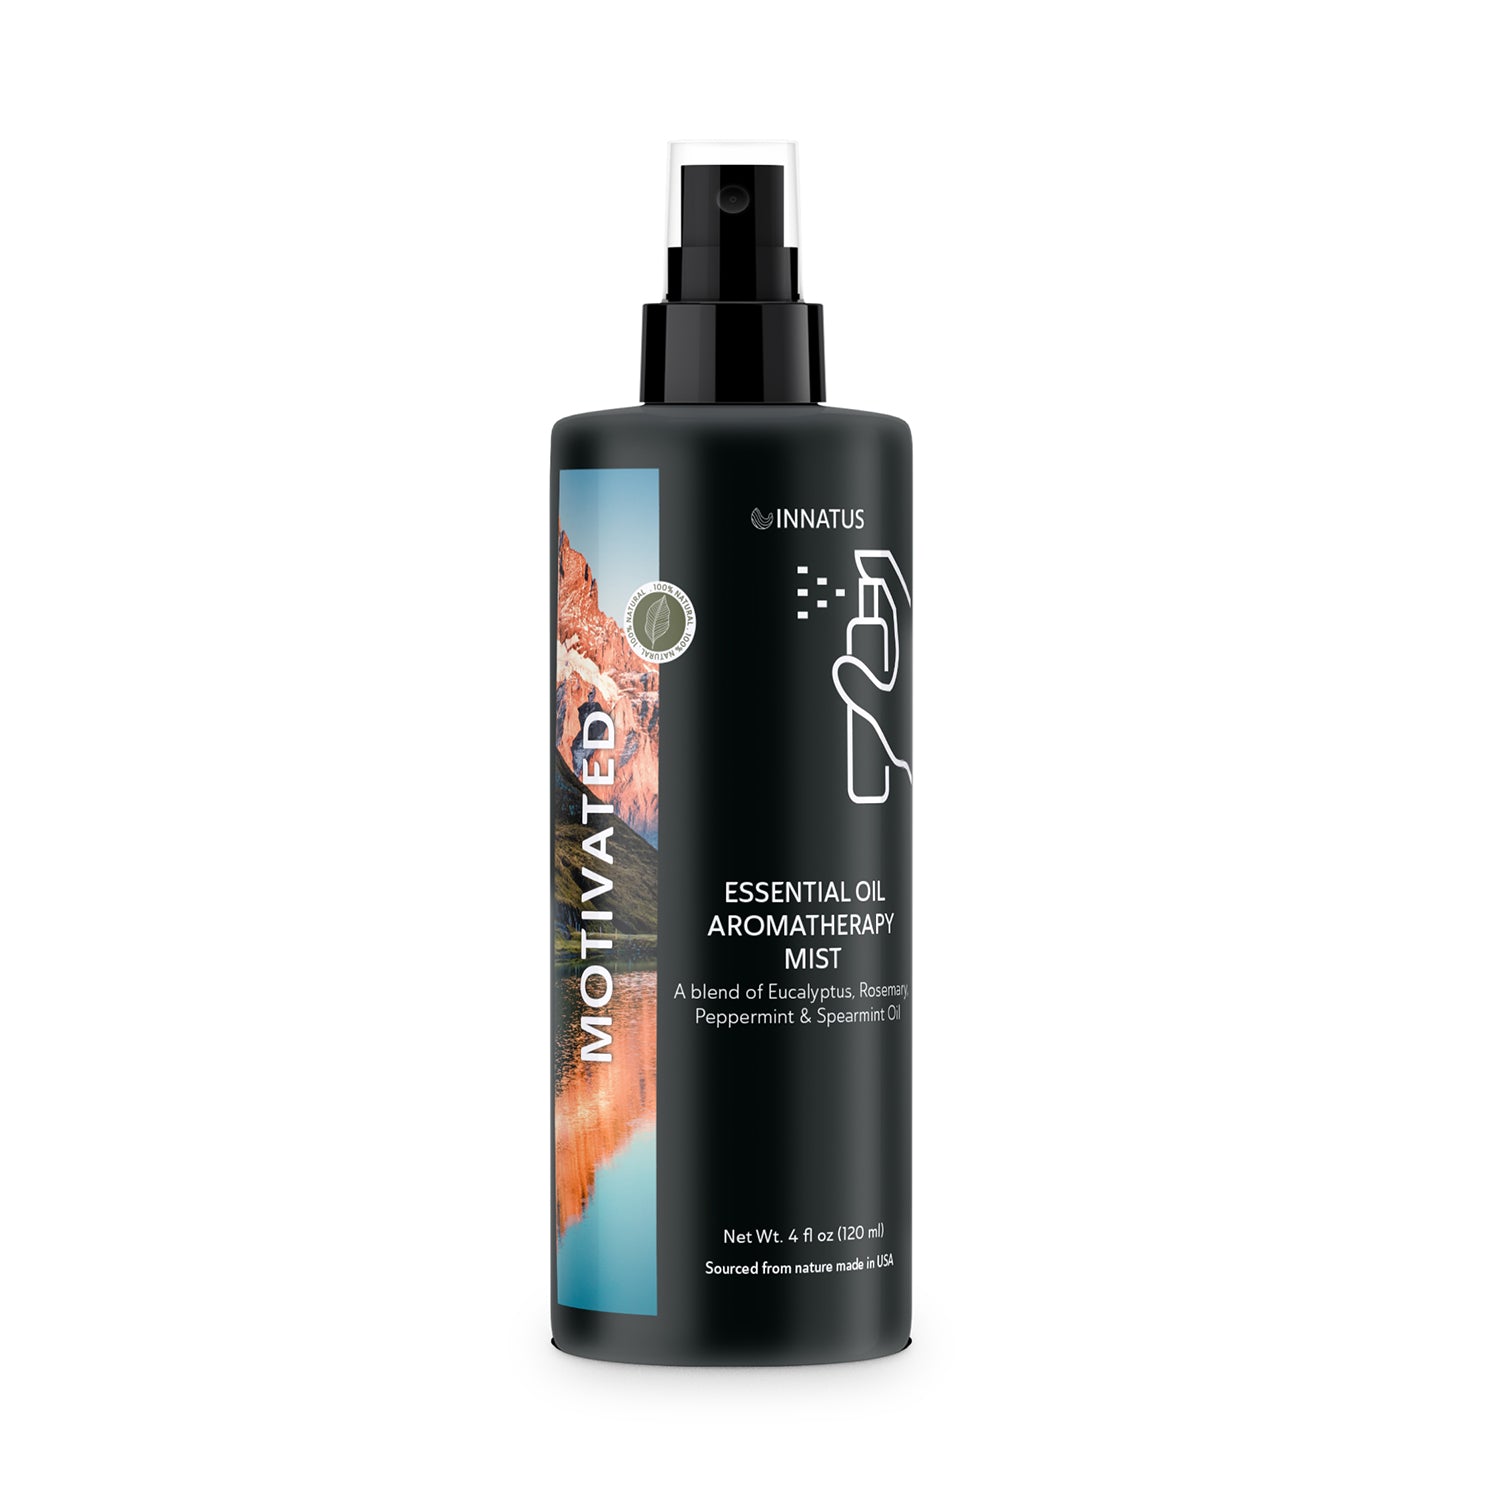 Eessential oil aromatherapy Motivated  mist